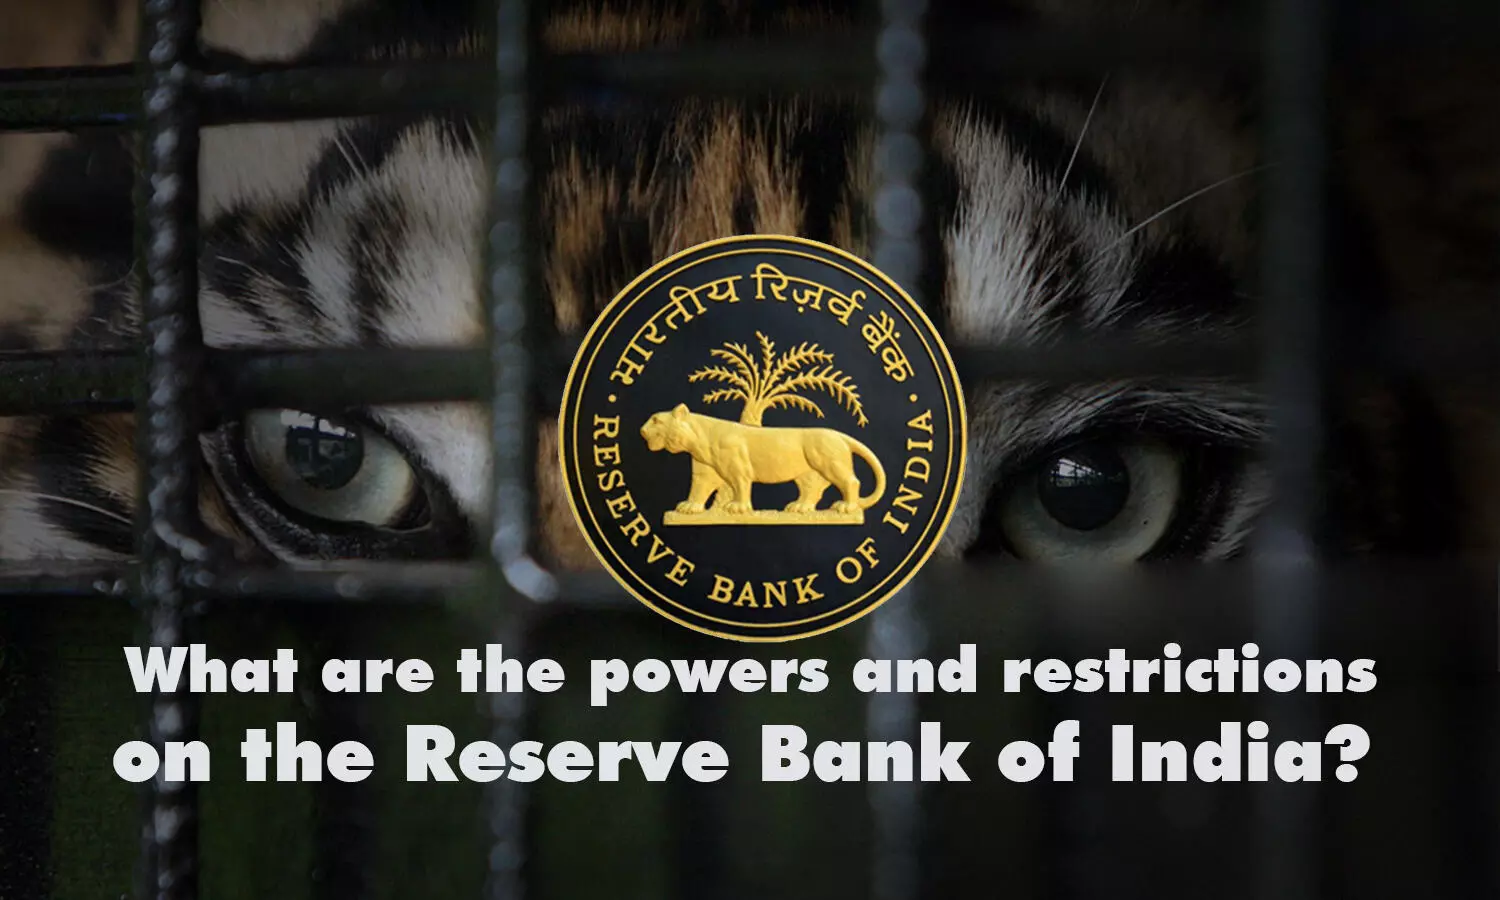 What are the powers and restrictions on the Reserve Bank of India?